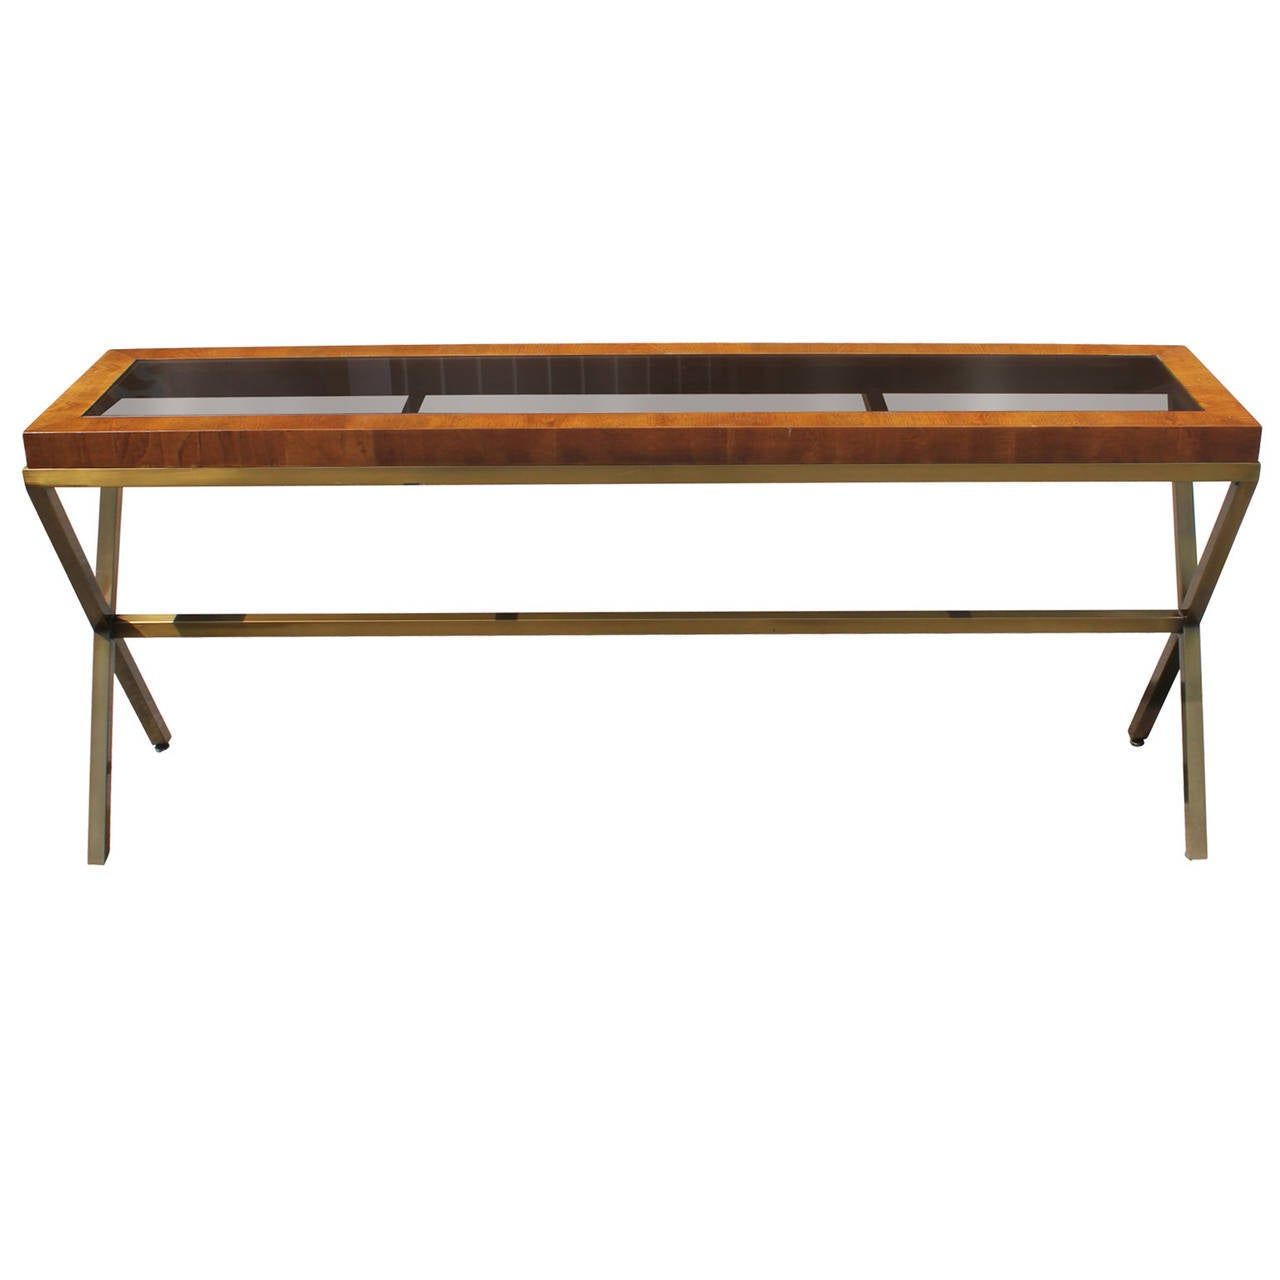 2020 Brass Smoked Glass Console Tables Throughout Stunning Brass, Smoked Glass, And Burl Wood Console At 1stdibs (View 1 of 10)